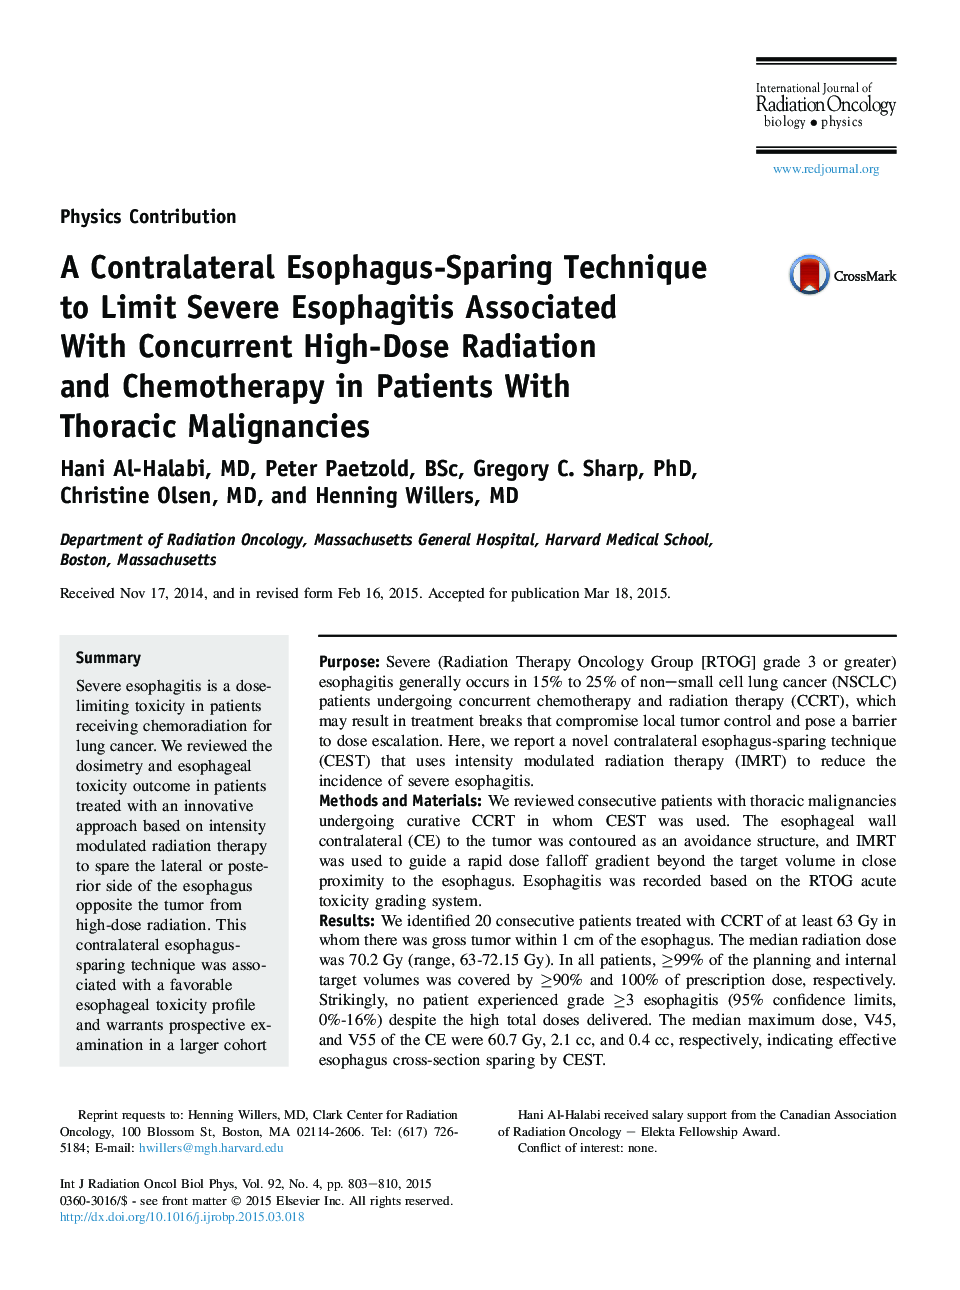 A Contralateral Esophagus-Sparing Technique to Limit Severe Esophagitis Associated With Concurrent High-Dose Radiation and Chemotherapy in Patients With Thoracic Malignancies